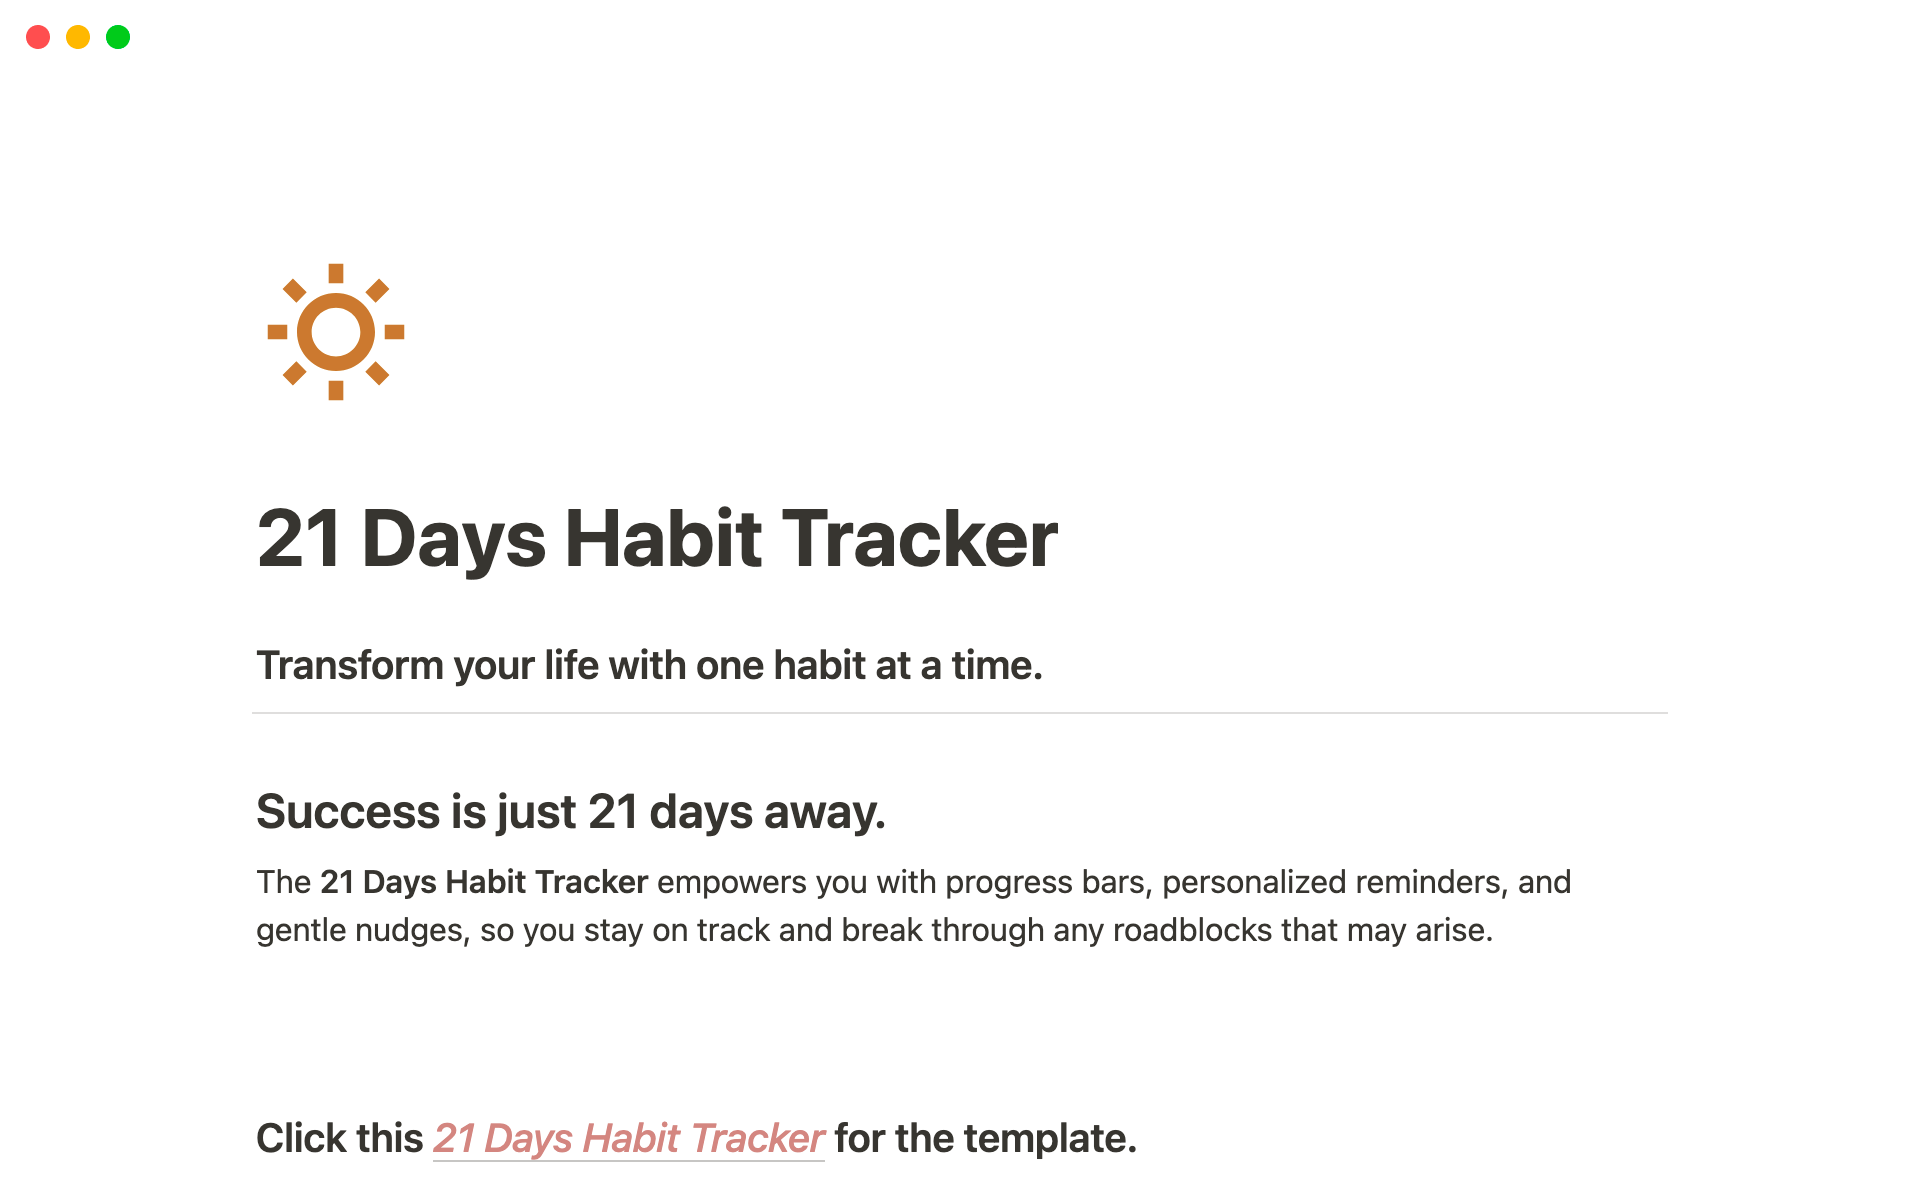 Transform your life by tracking and reinforcing new habits over a focused 21-day period.